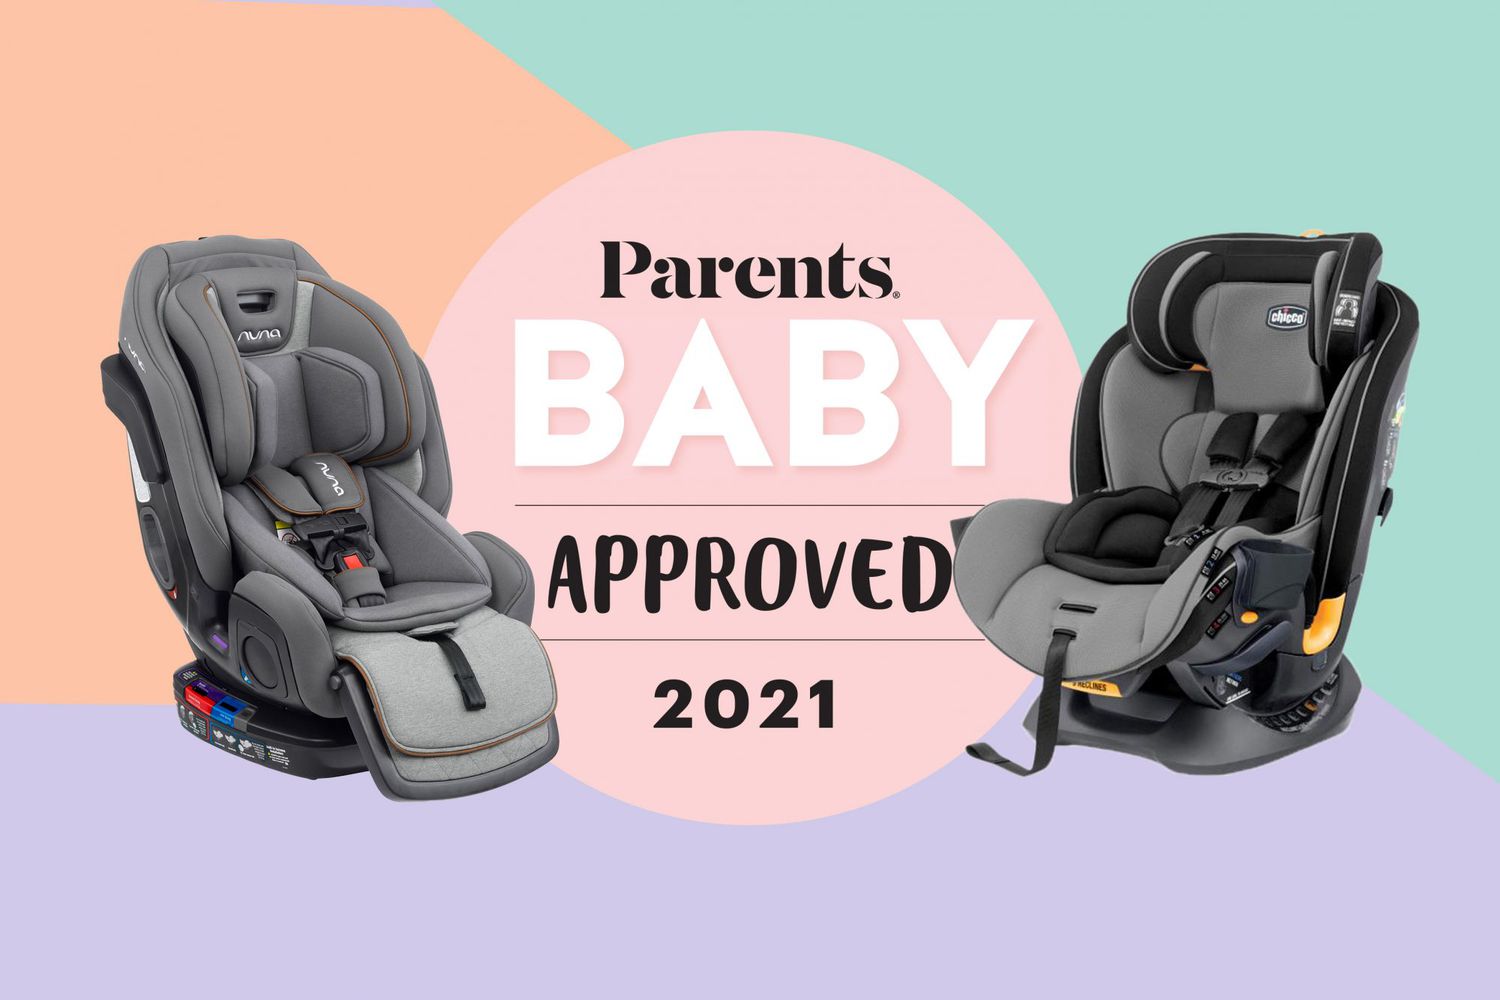 An image of car seats on a colorful background.